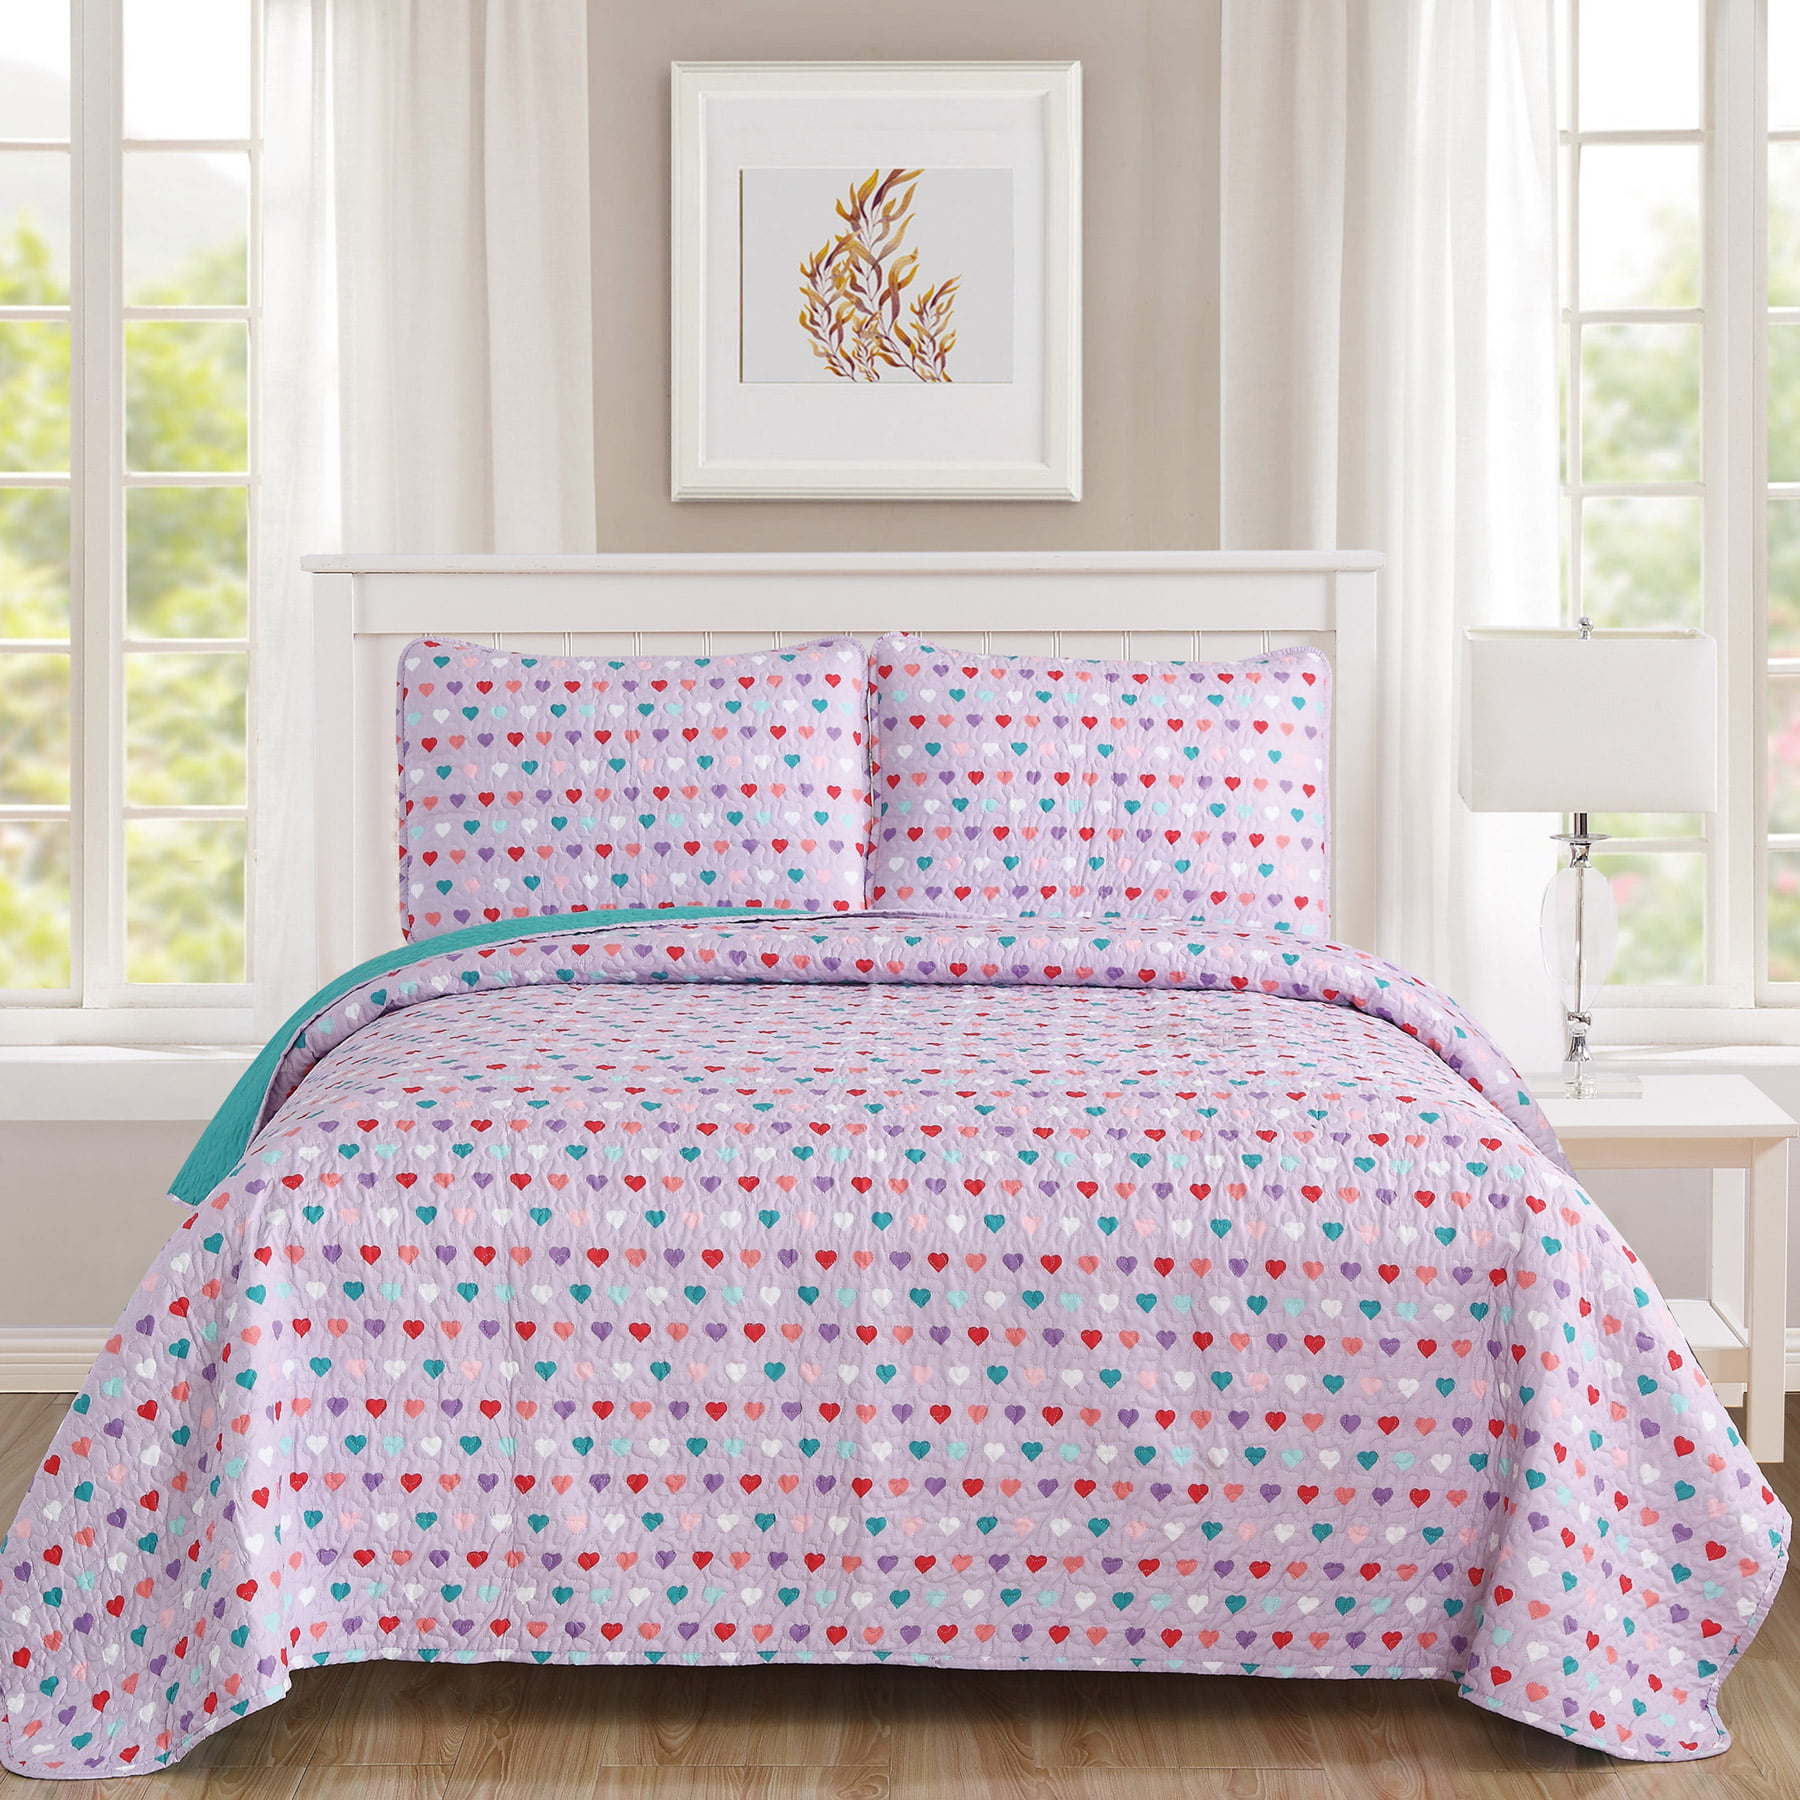 Sweet Home Collection Reversible Kids Hearts Quilt - Walmart.com